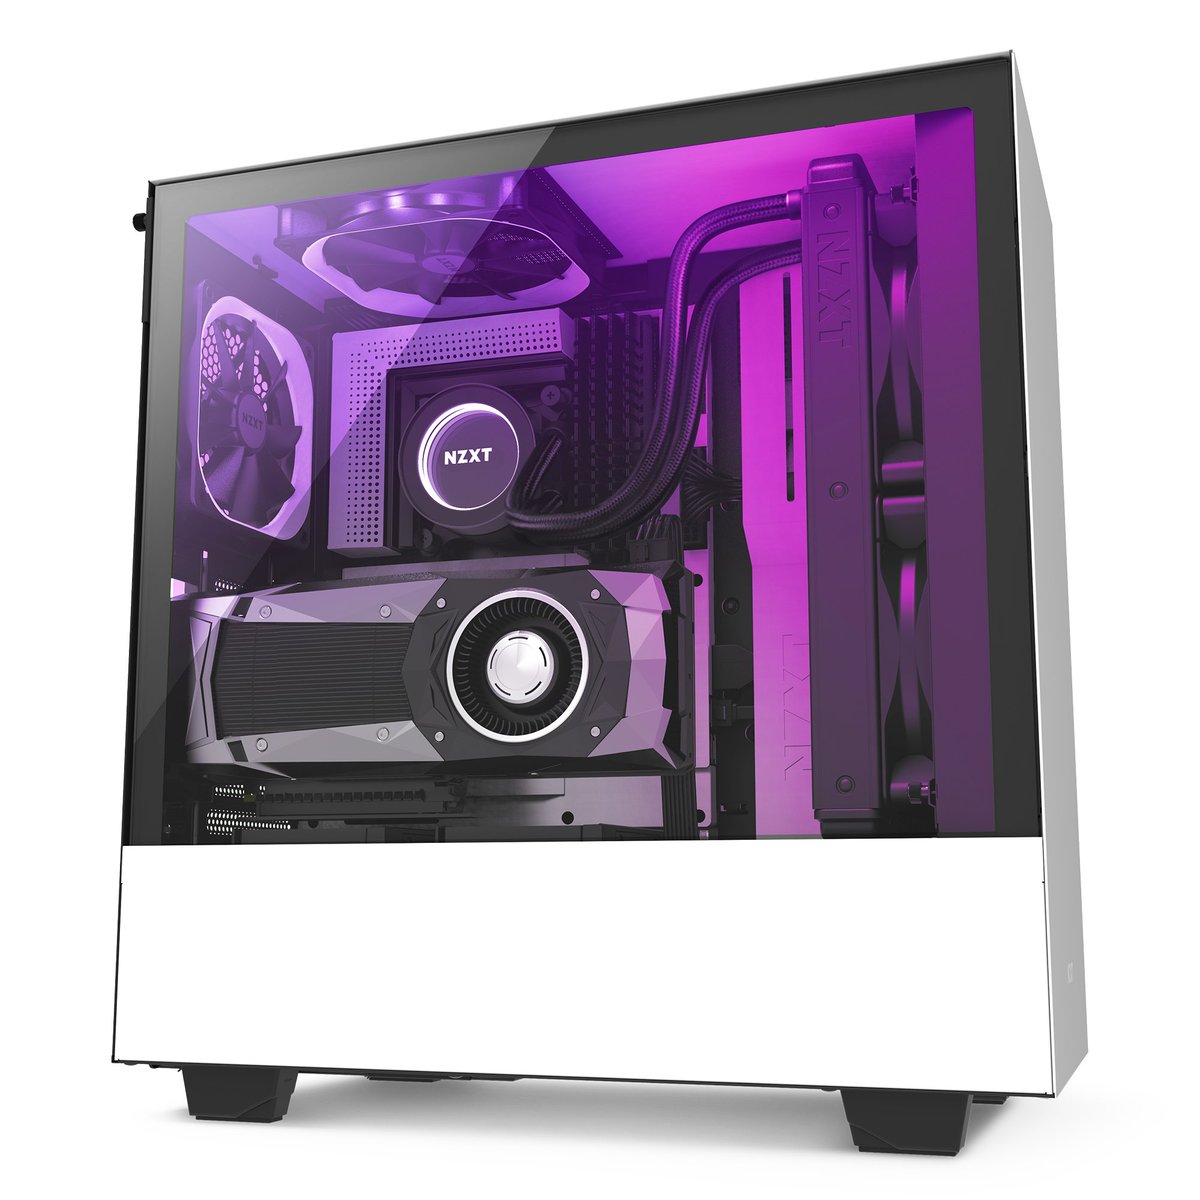 Becks gammelklog Perth Mounting GPU Vertically: Does it affect thermals?